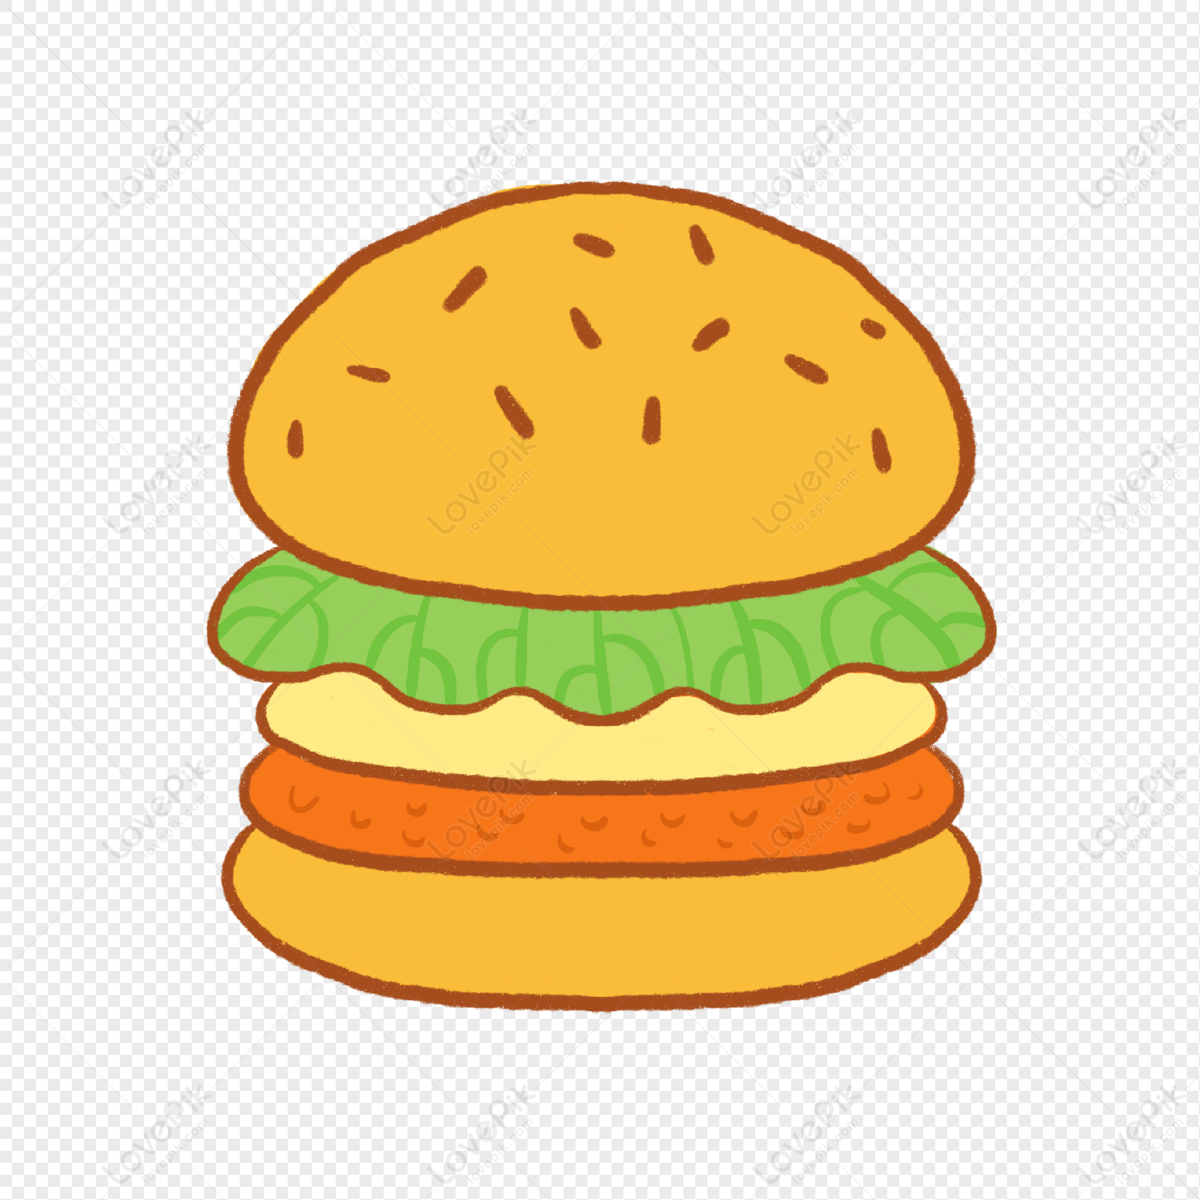 Cartoon Burger PNG Picture And Clipart Image For Free Download - Lovepik |  401276385